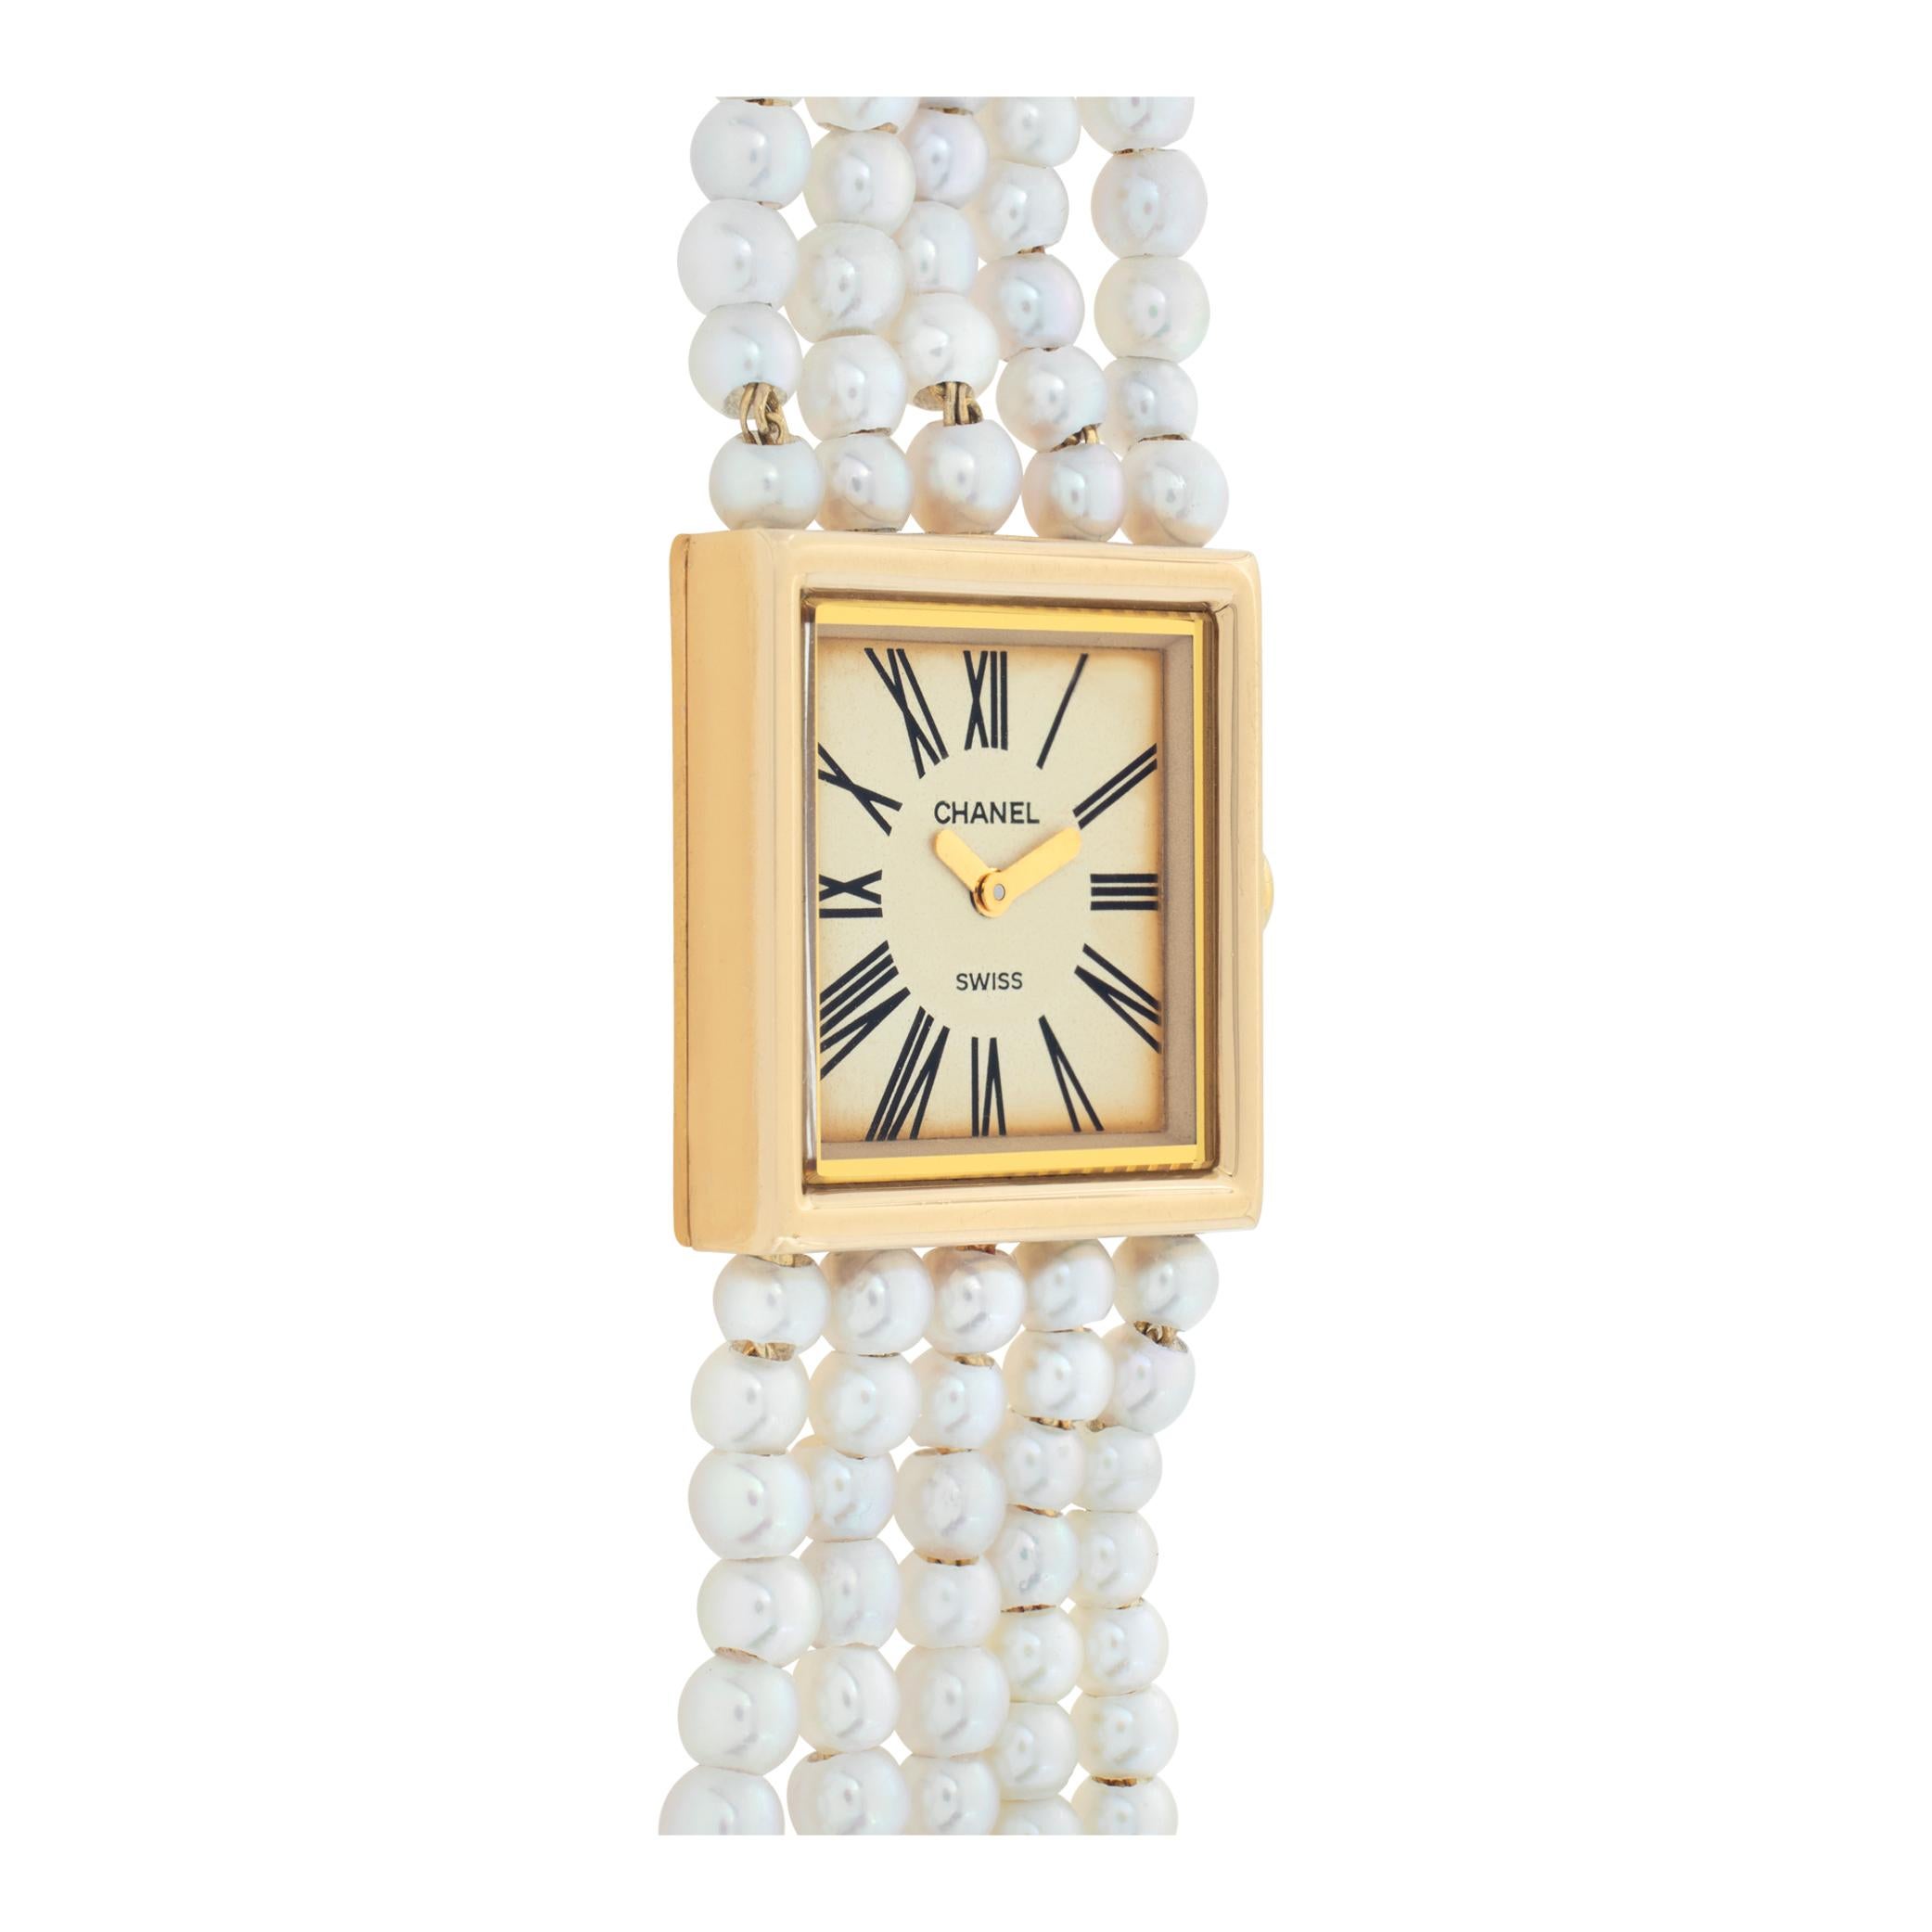 Chanel Mademoiselle in 18k yellow gold with 5 strands of pearls and 18k bracelet. Quartz. 22.4 mm case size. Will fit up to a 6.25